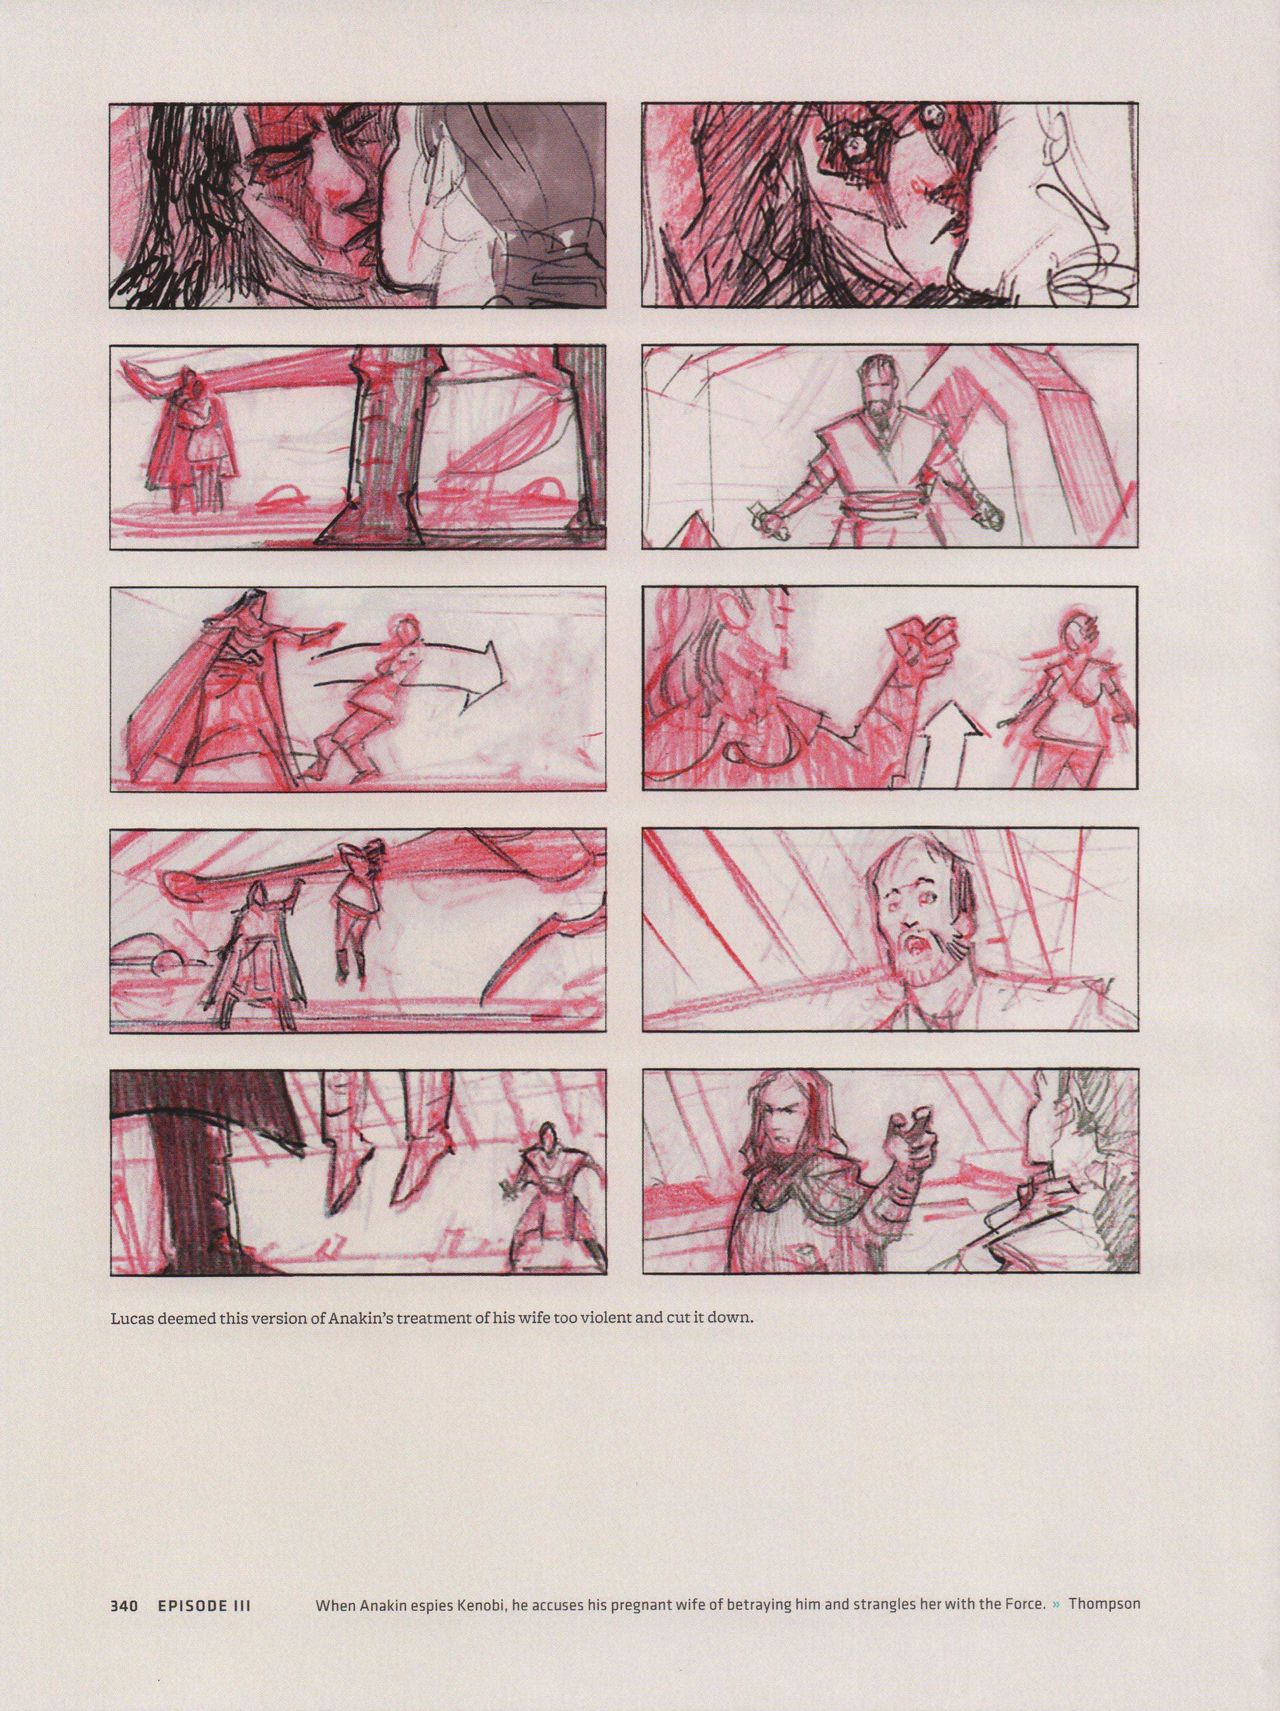 Star Wars Storyboards - The Prequel Trilogy 344